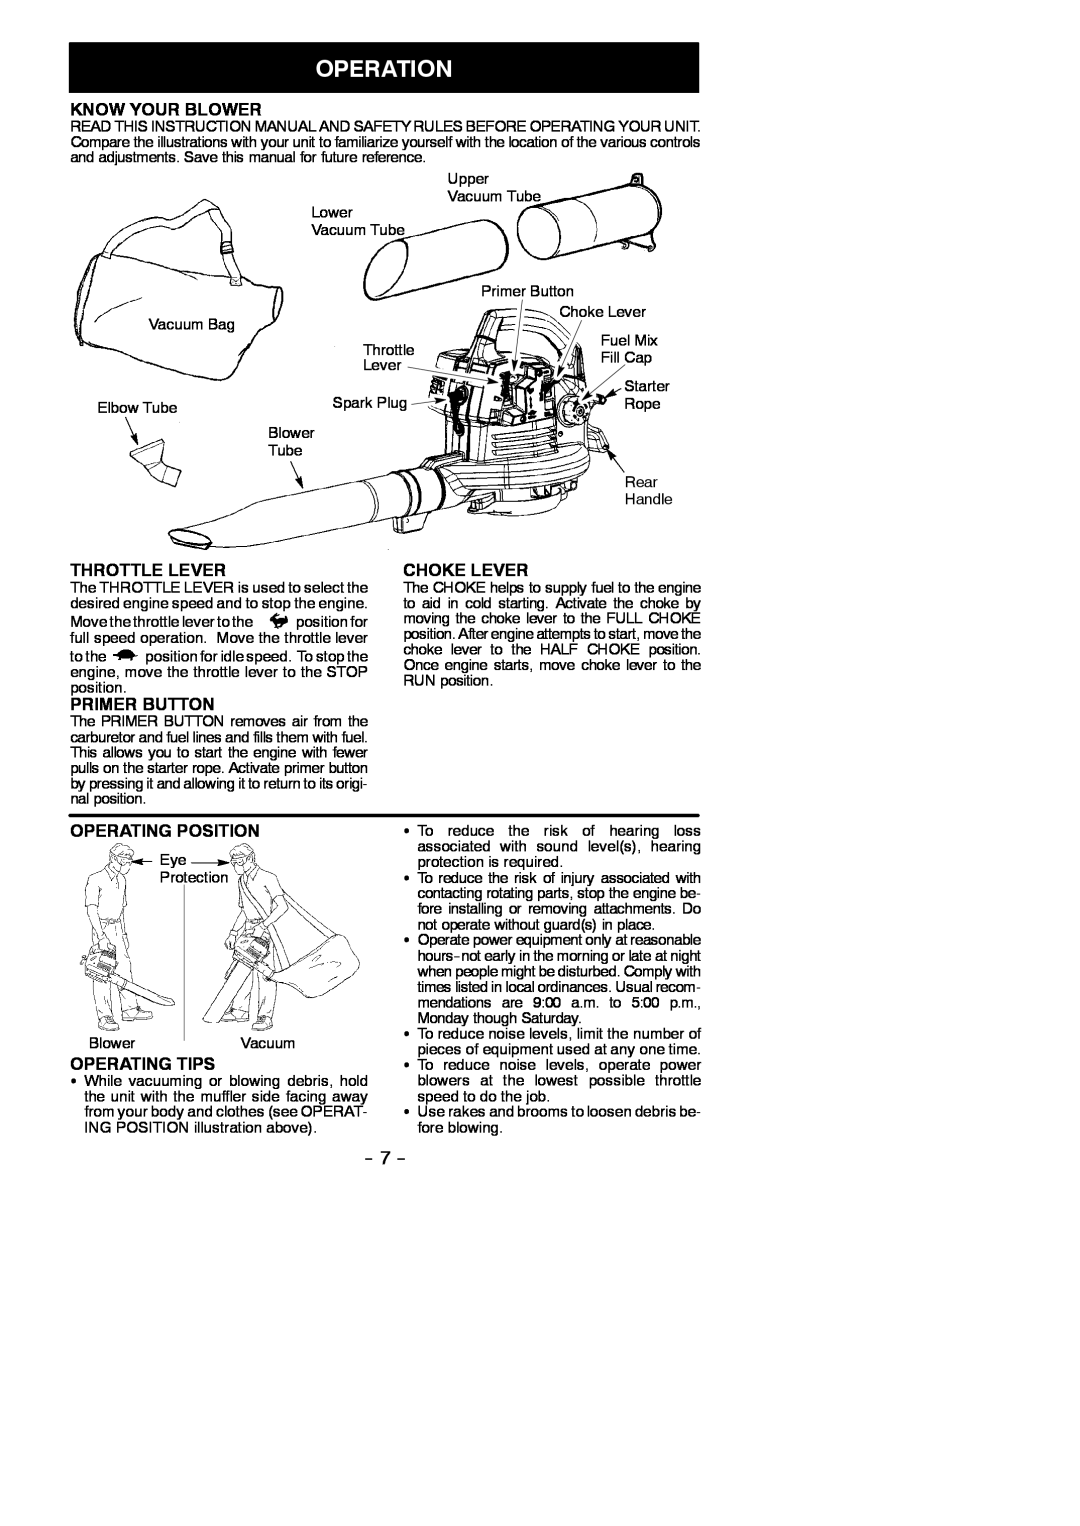 Poulan 545137223 Operation, Know Your Blower, Throttle Lever, Choke Lever, Primer Button, Operating Position 